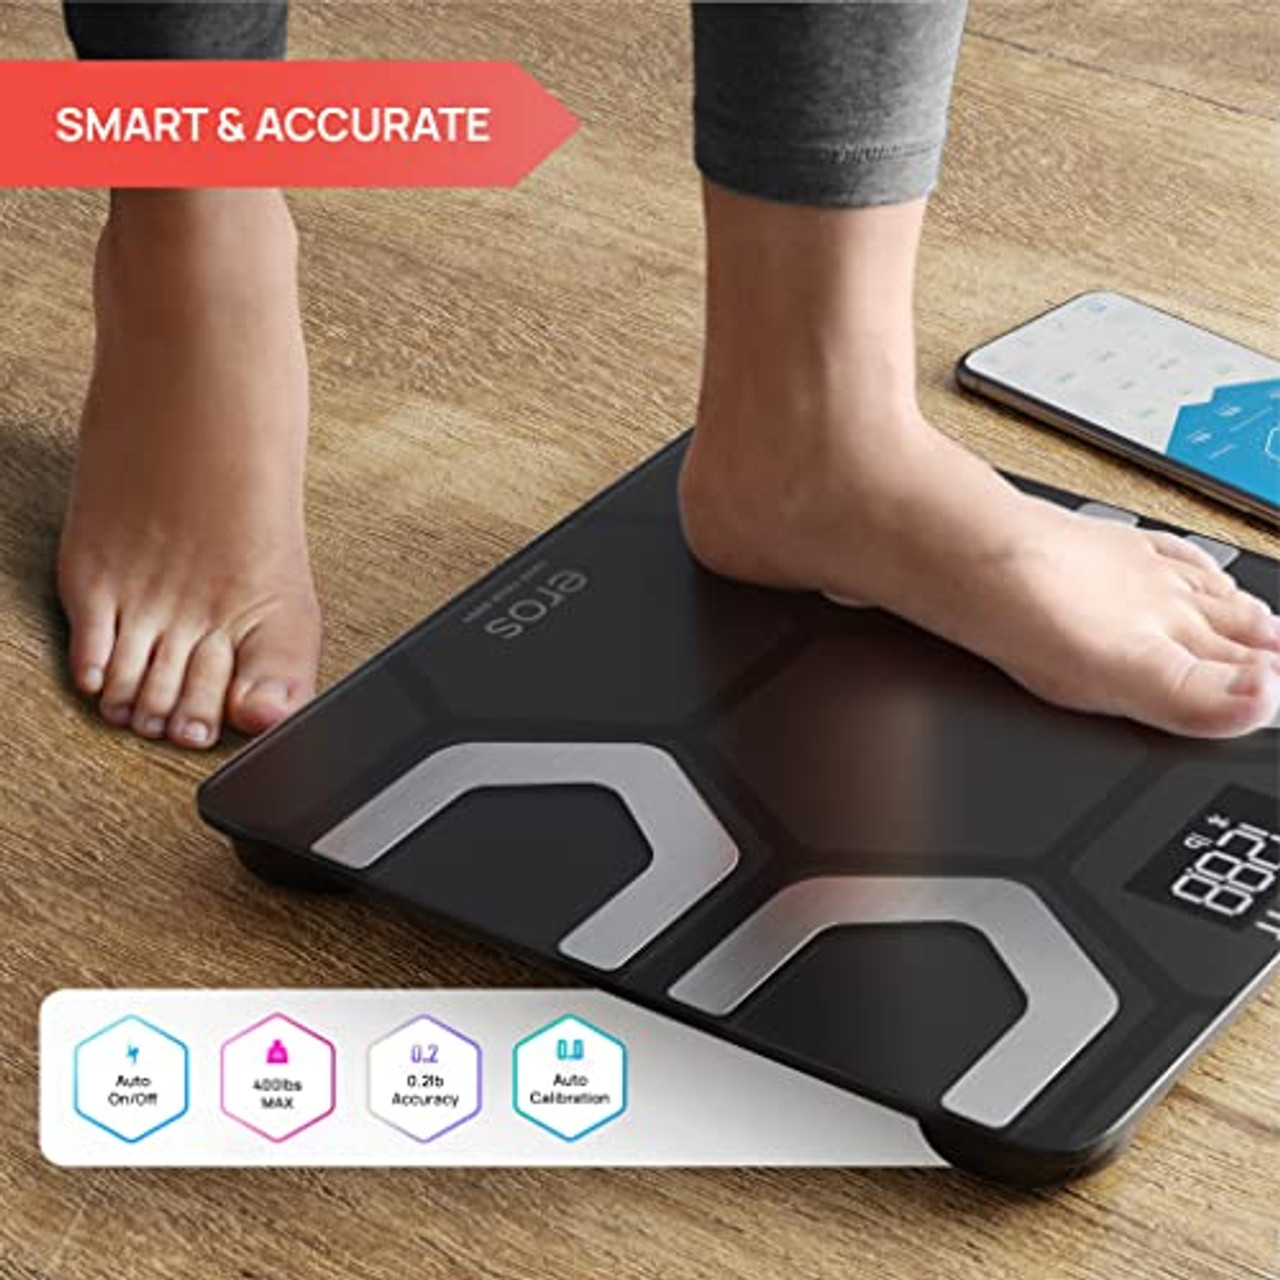 INEVIFIT EROS Bluetooth Body Fat Scale Smart BMI Highly Accurate